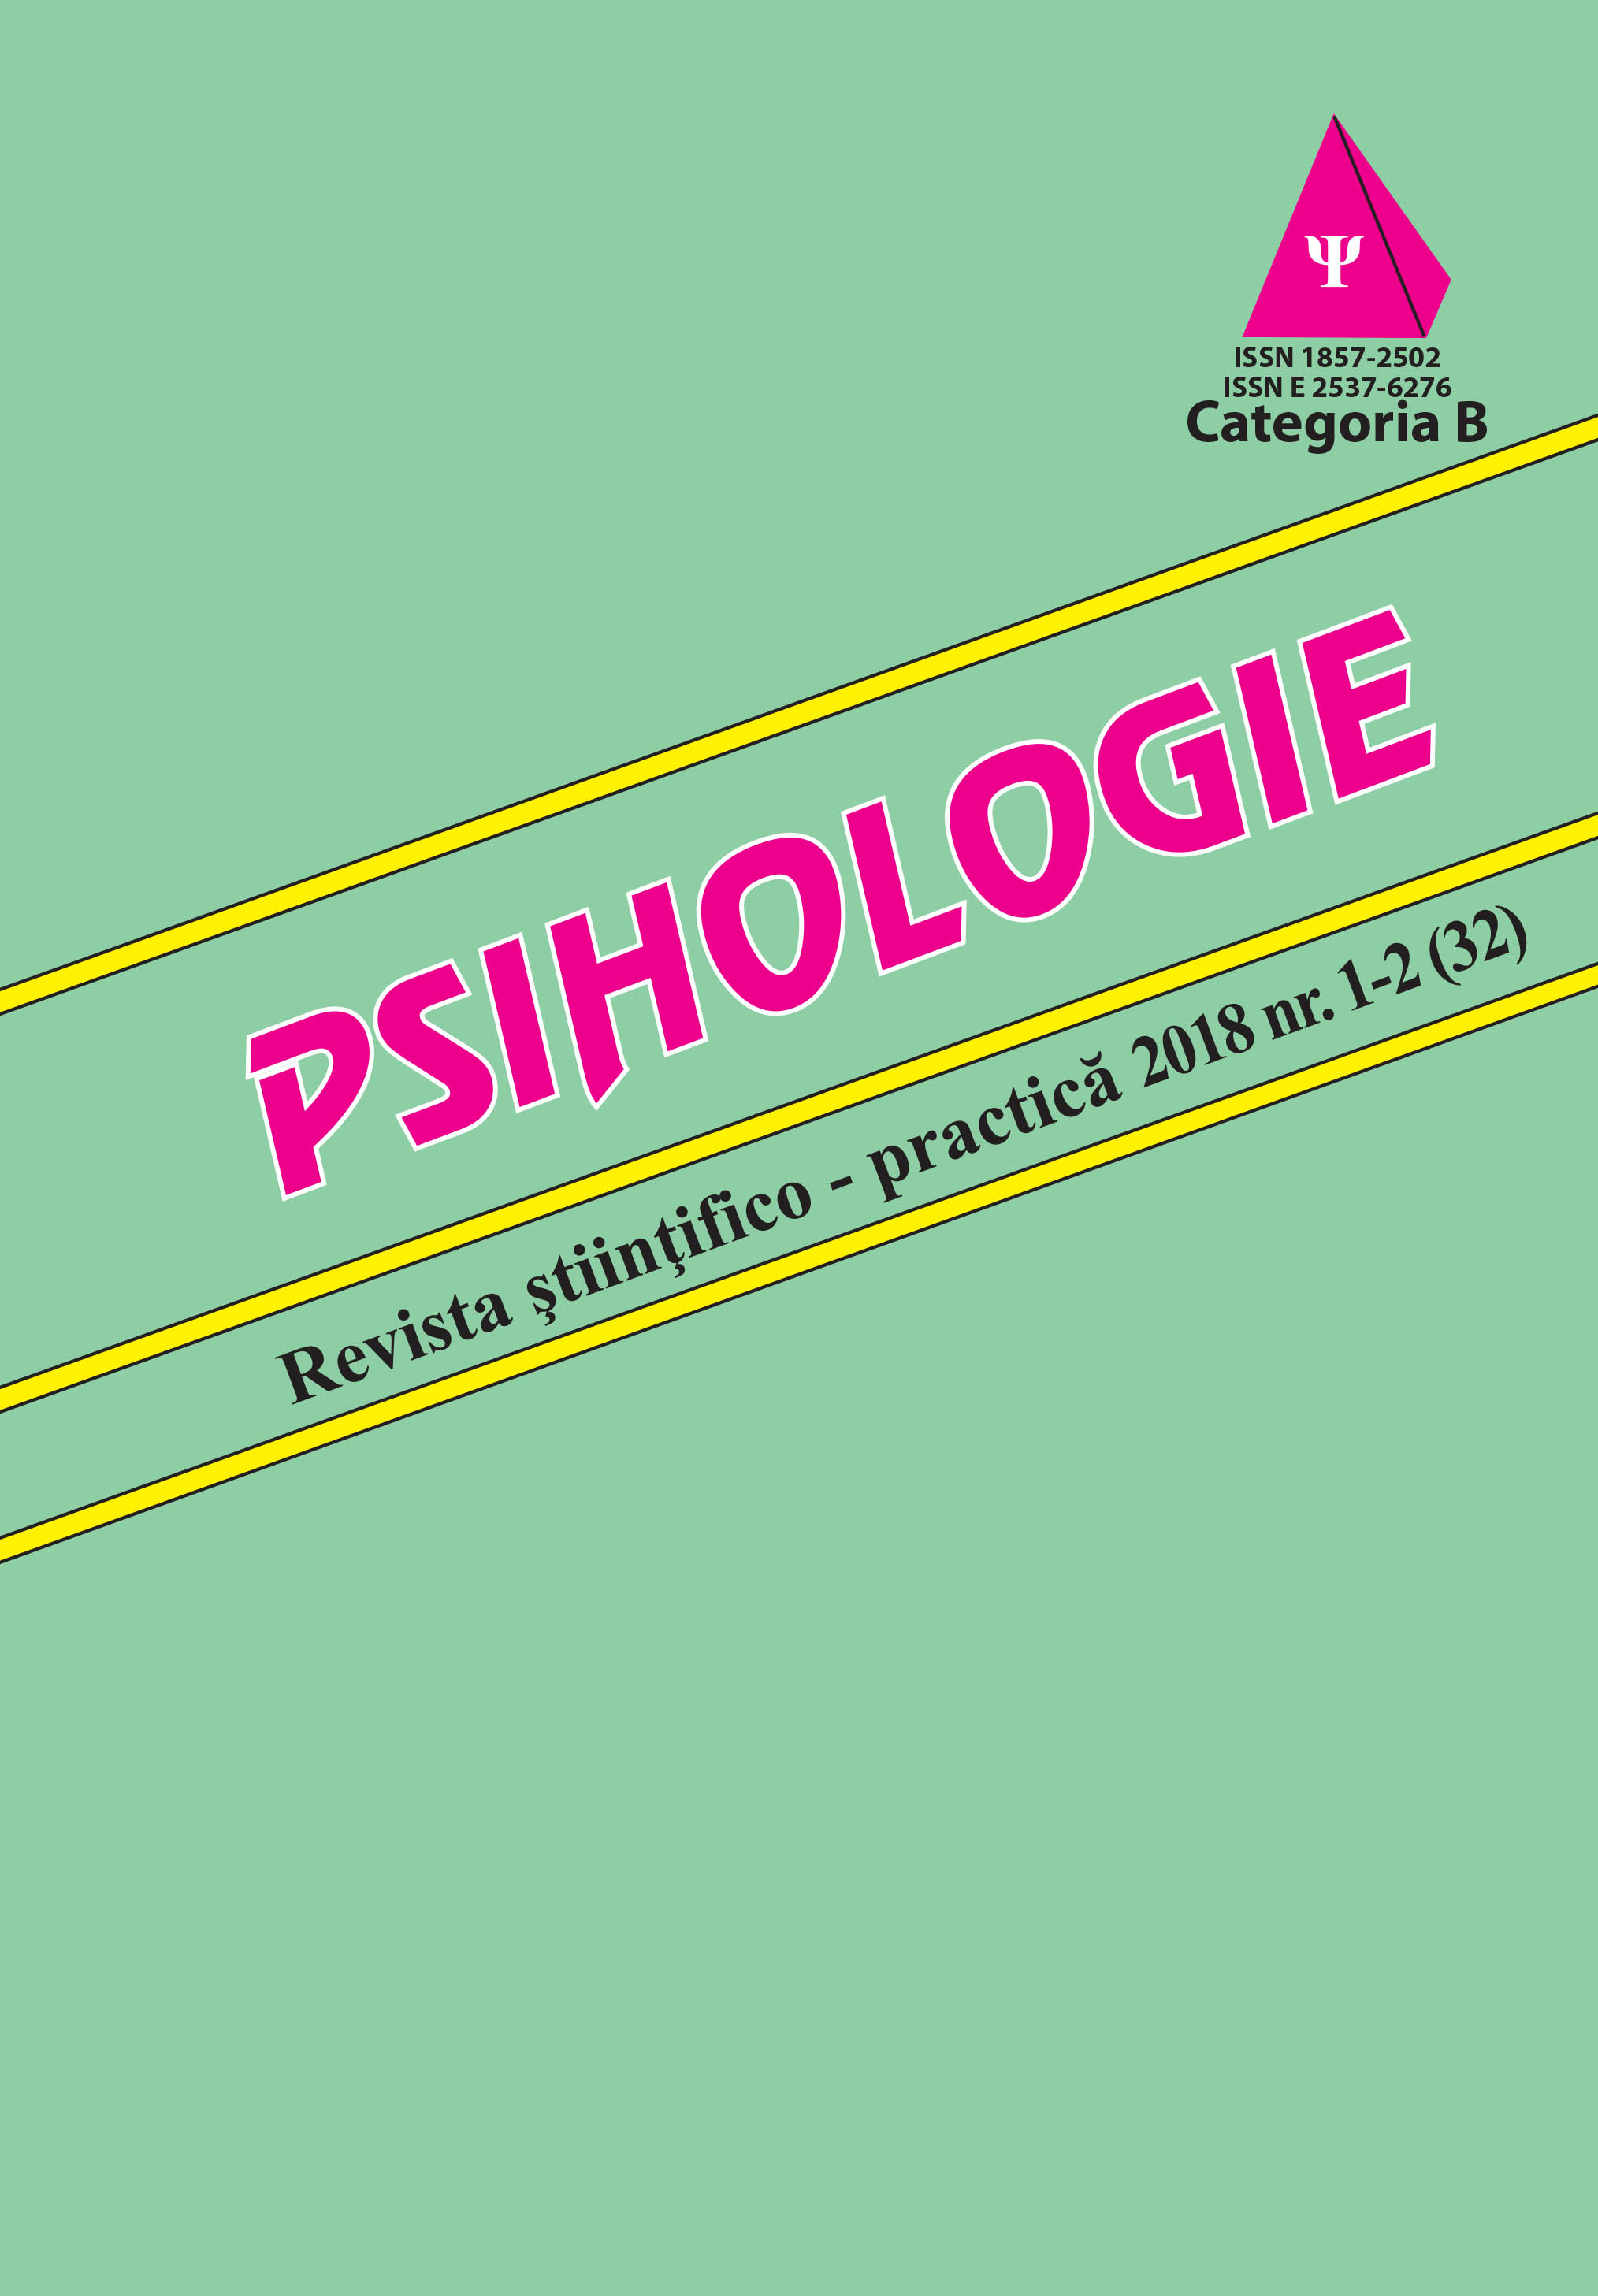 Psychology, the Scientific-practical journal